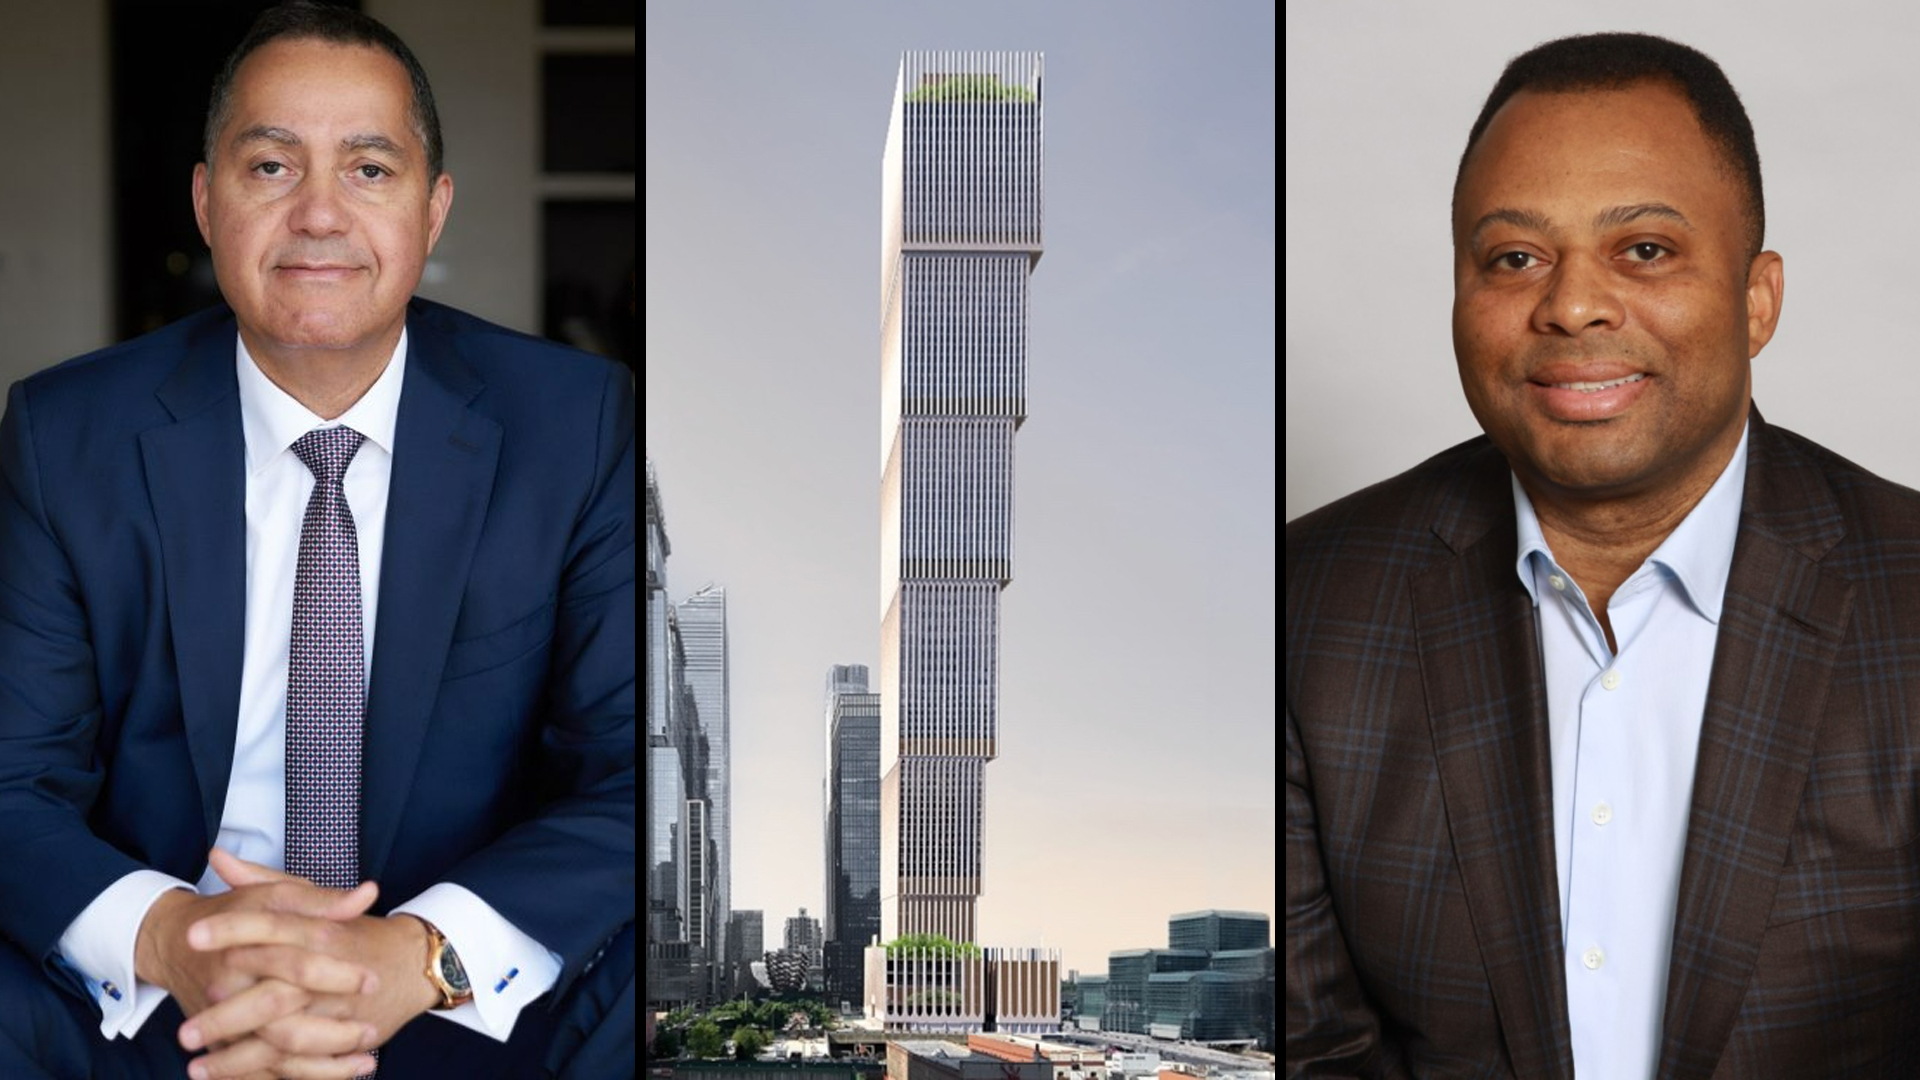 Plans To Construct New York's First Skyscraper Led By A Majority Black-Led Team Are Officially Underway